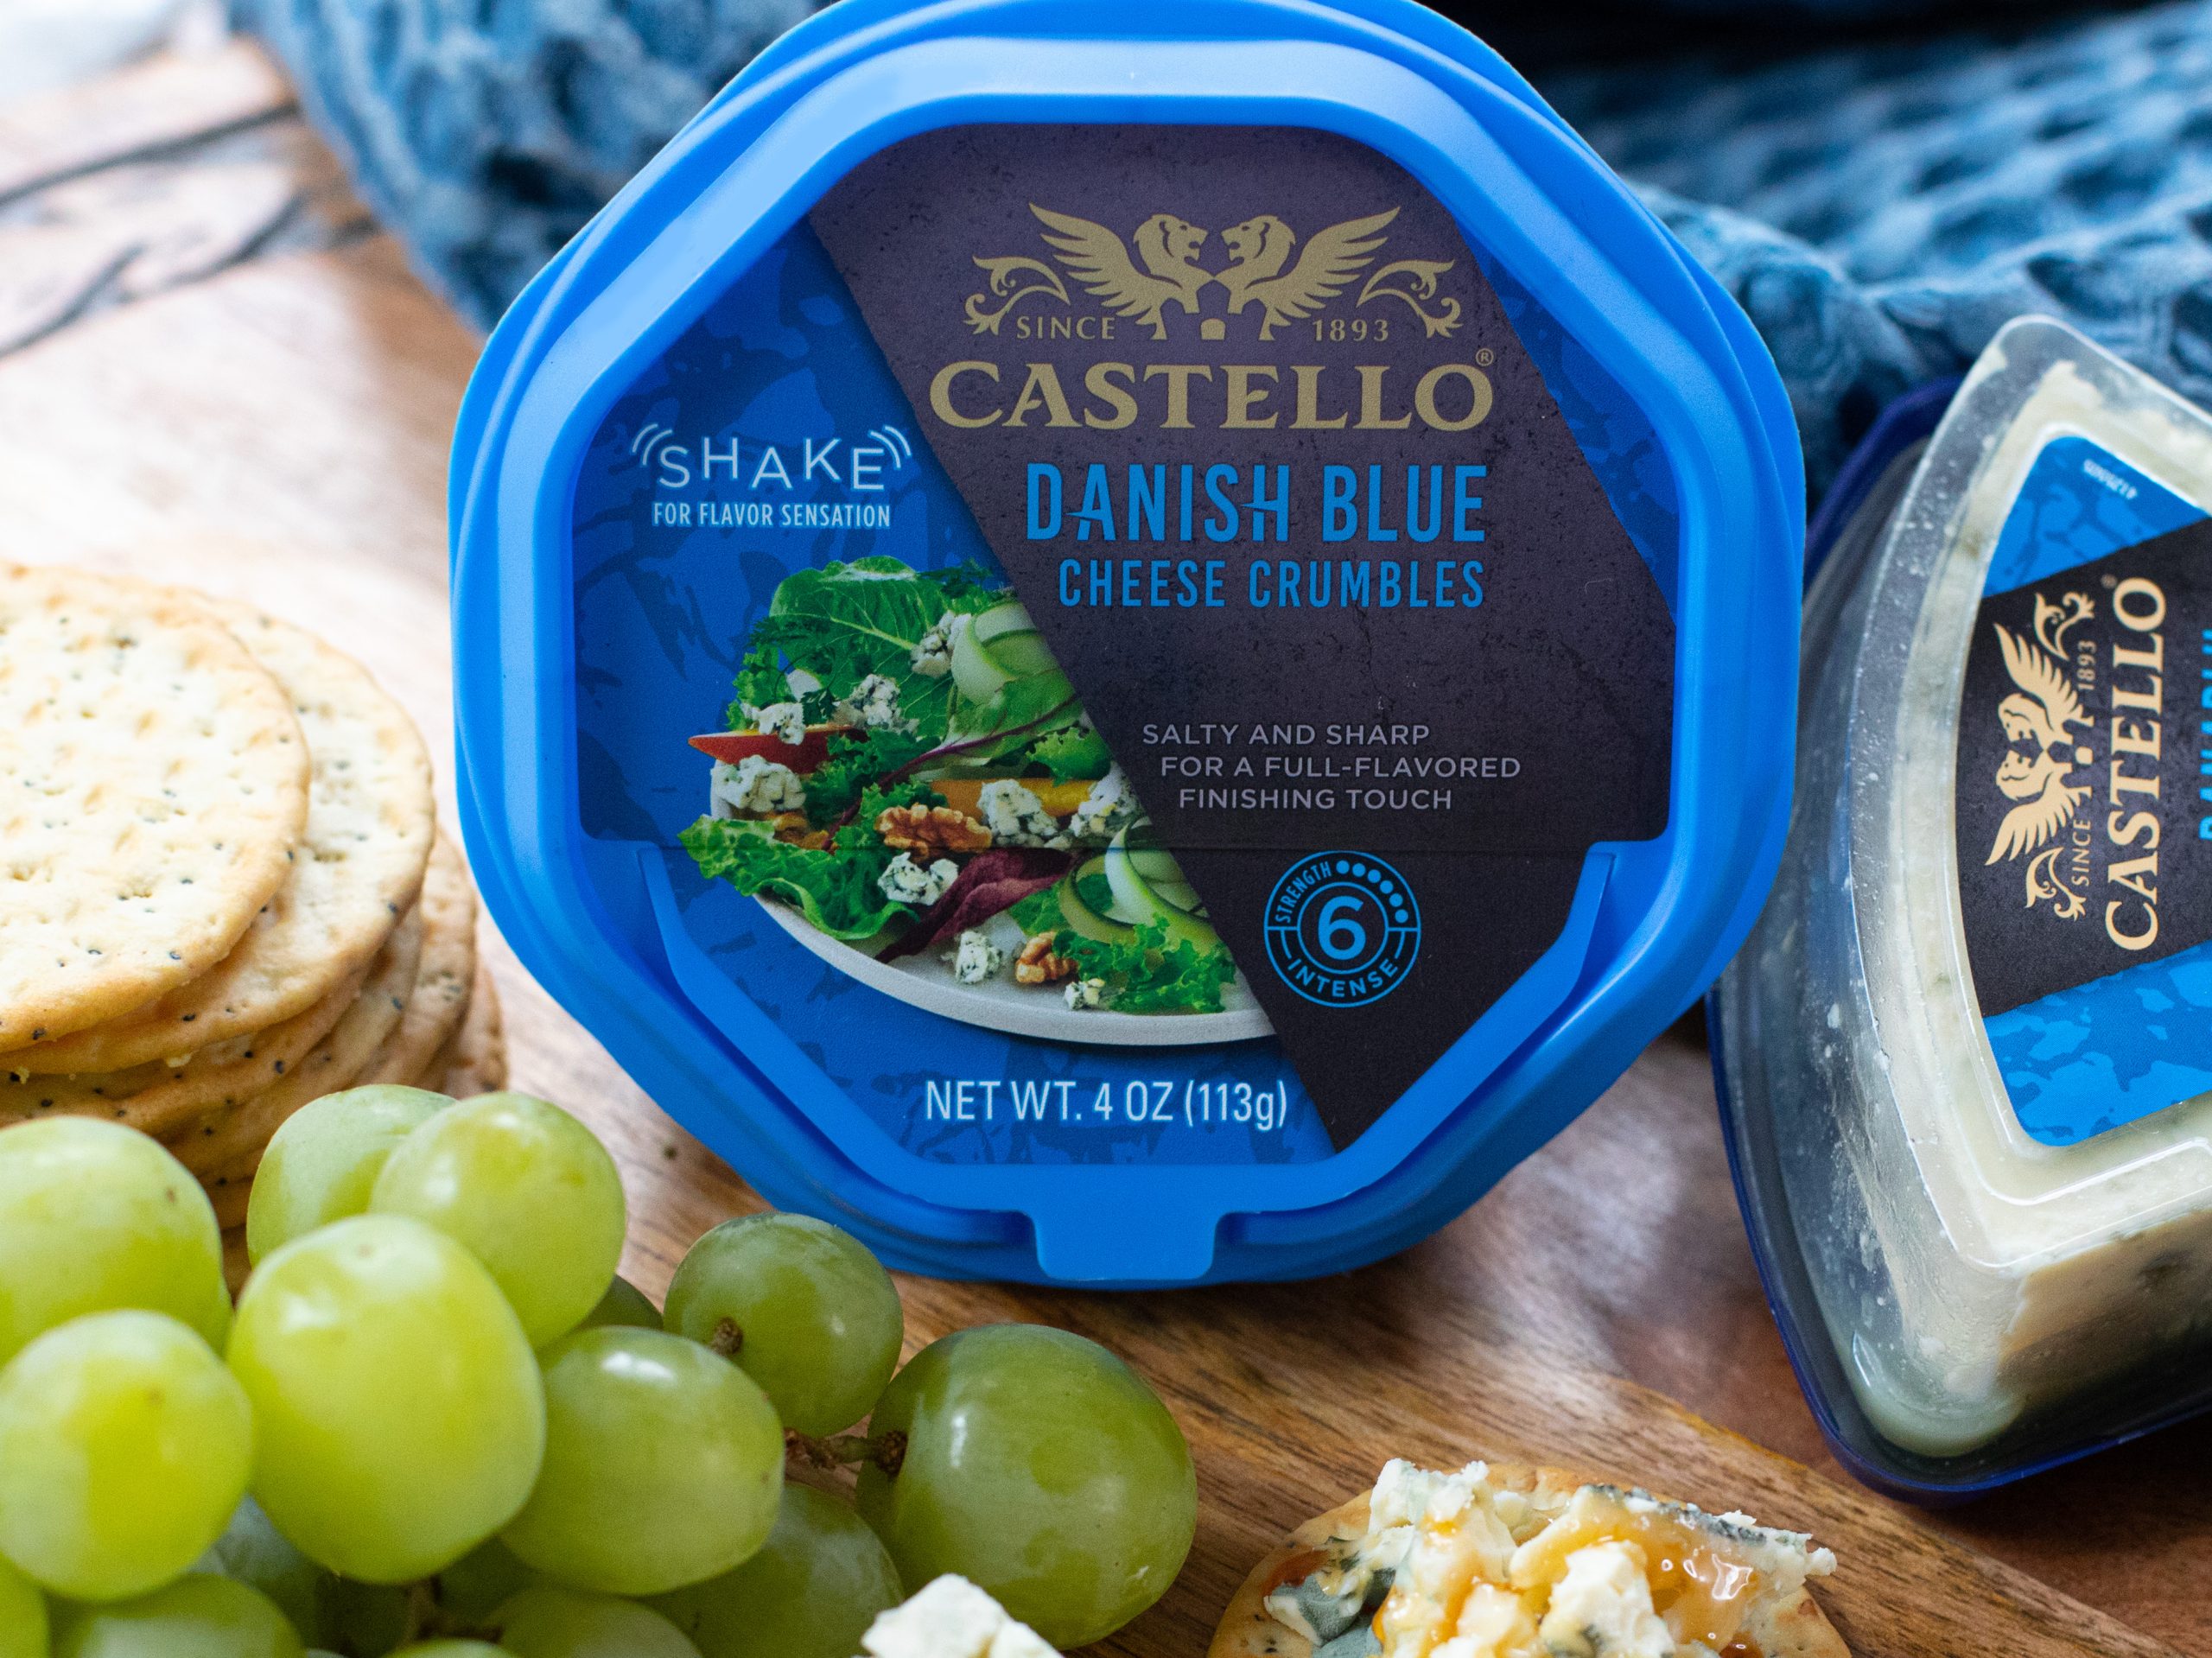 Bring Home Delicious Castello® Blue Cheese For Your Favorite Holiday Meals & Recipes - On Sale Buy One, Get One FREE! on I Heart Publix